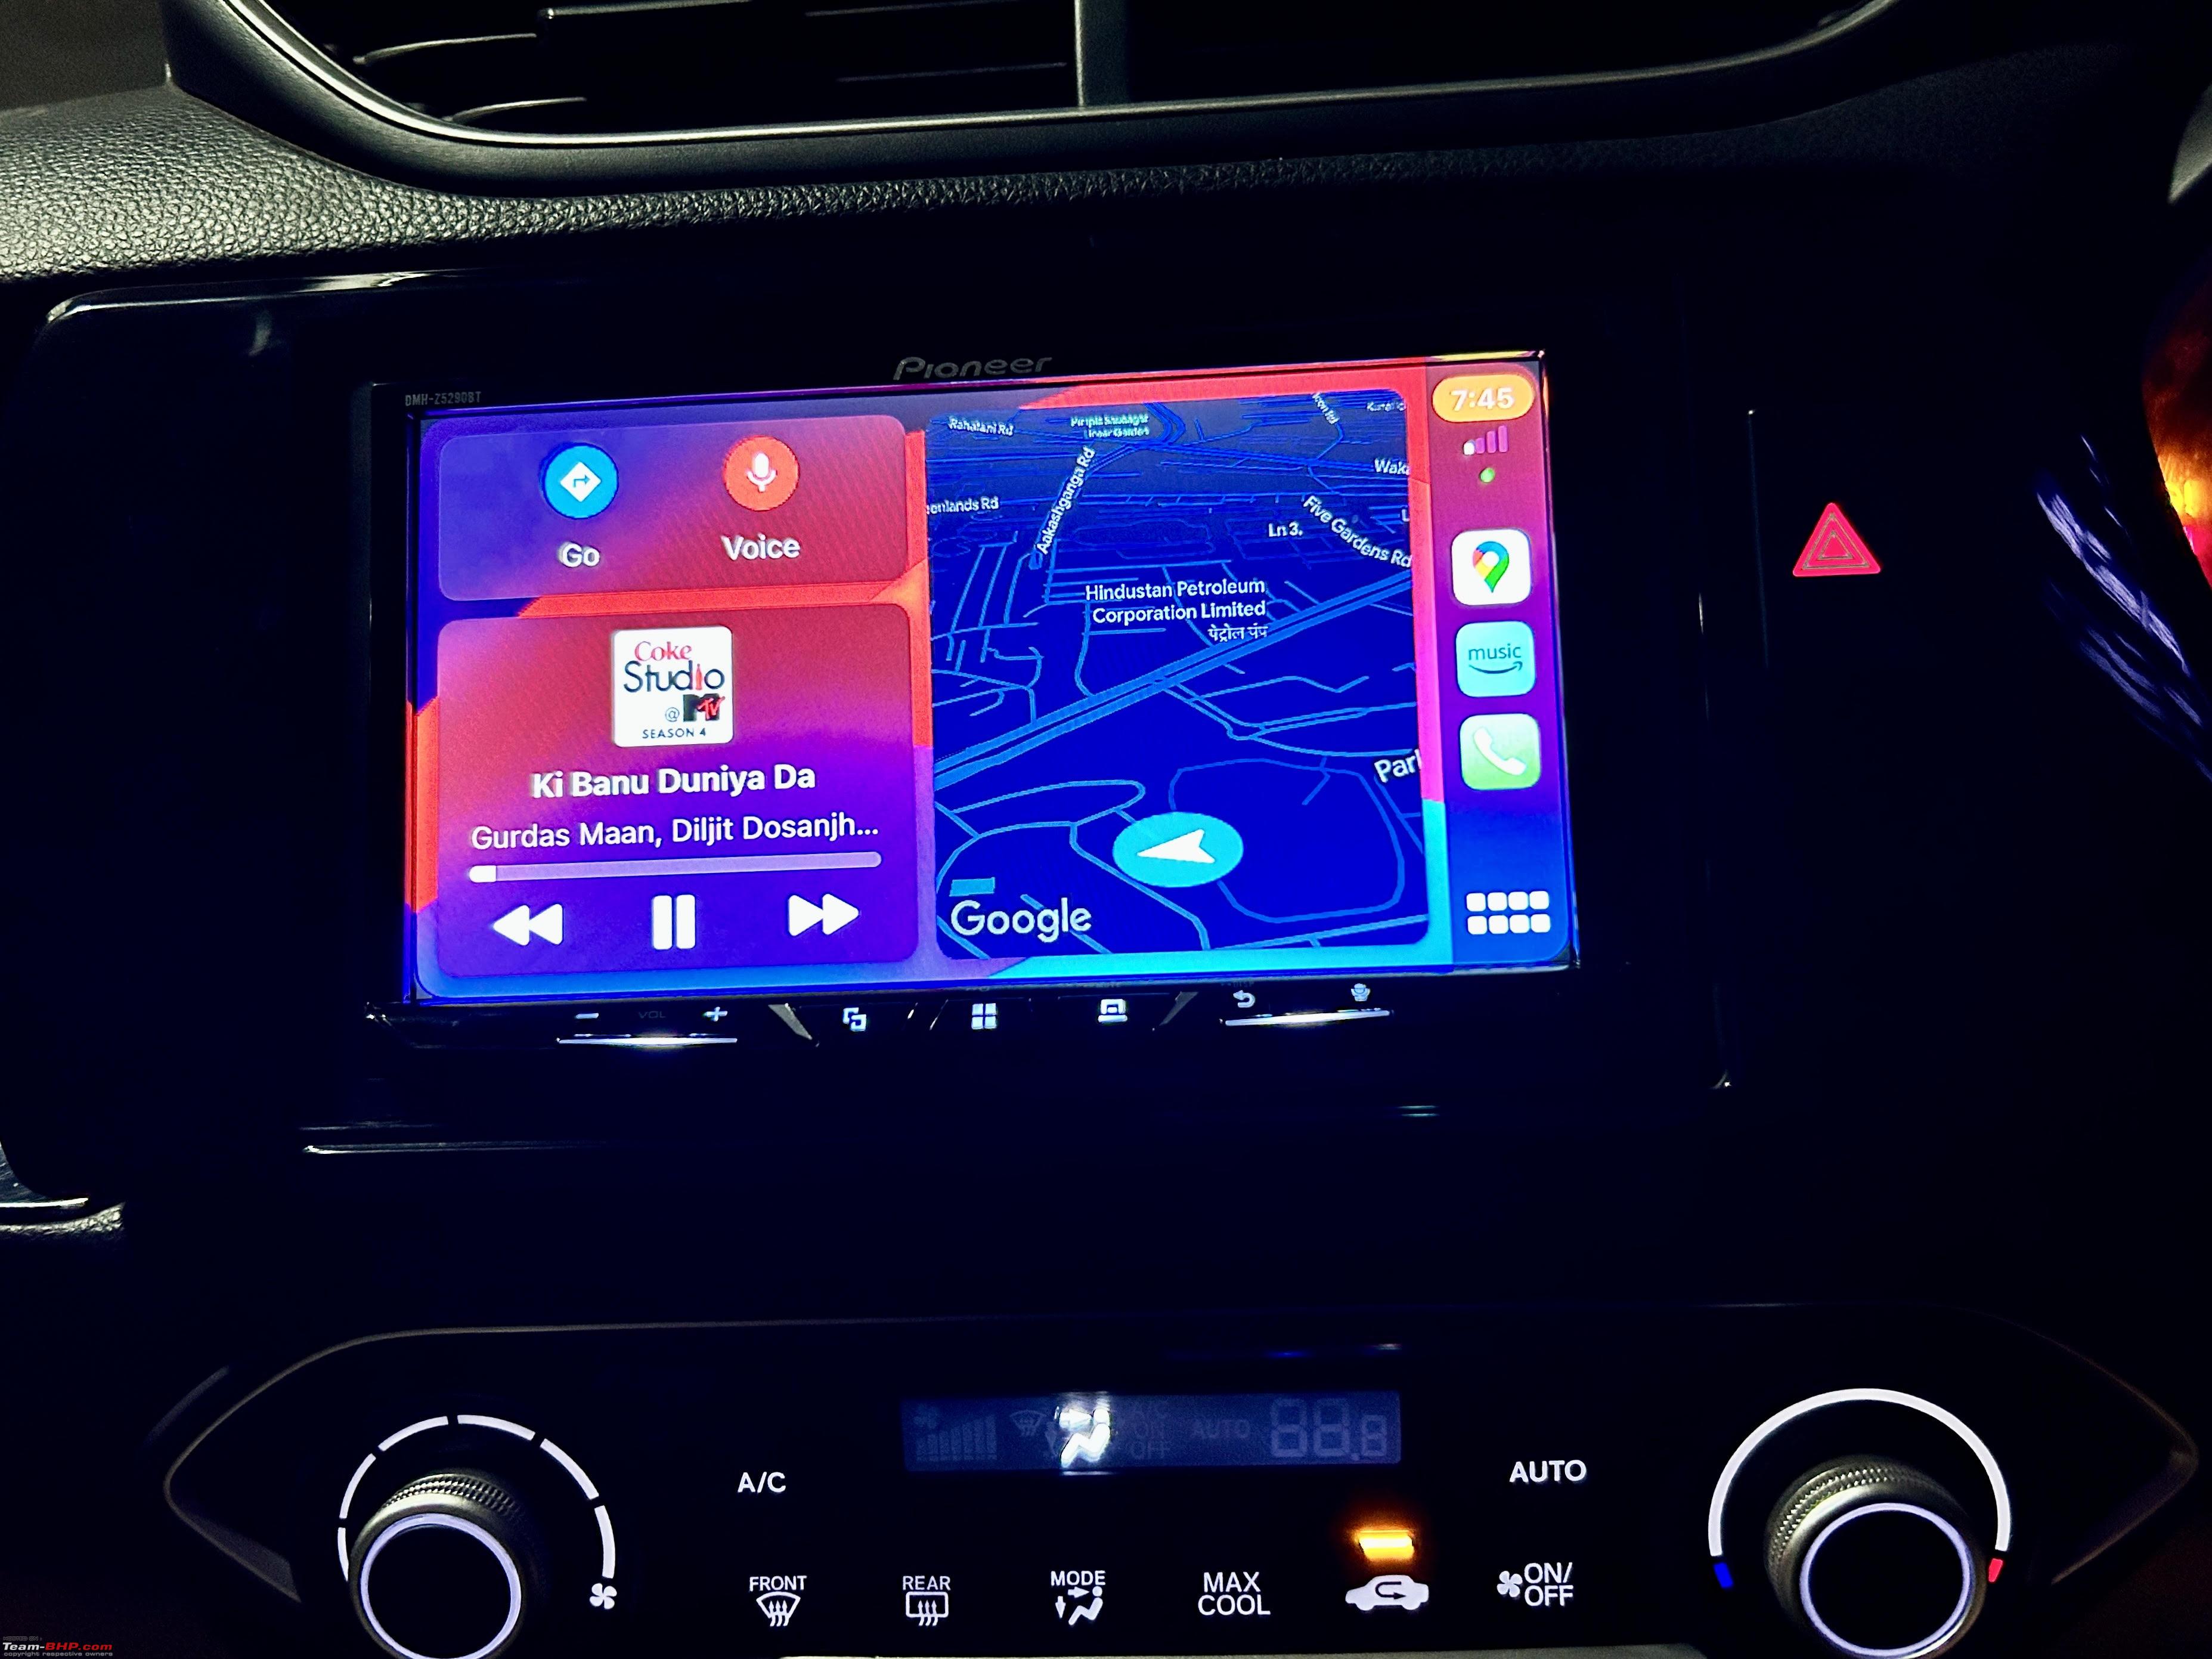 Pioneer India  A trusted brand of car stereo headunits, car